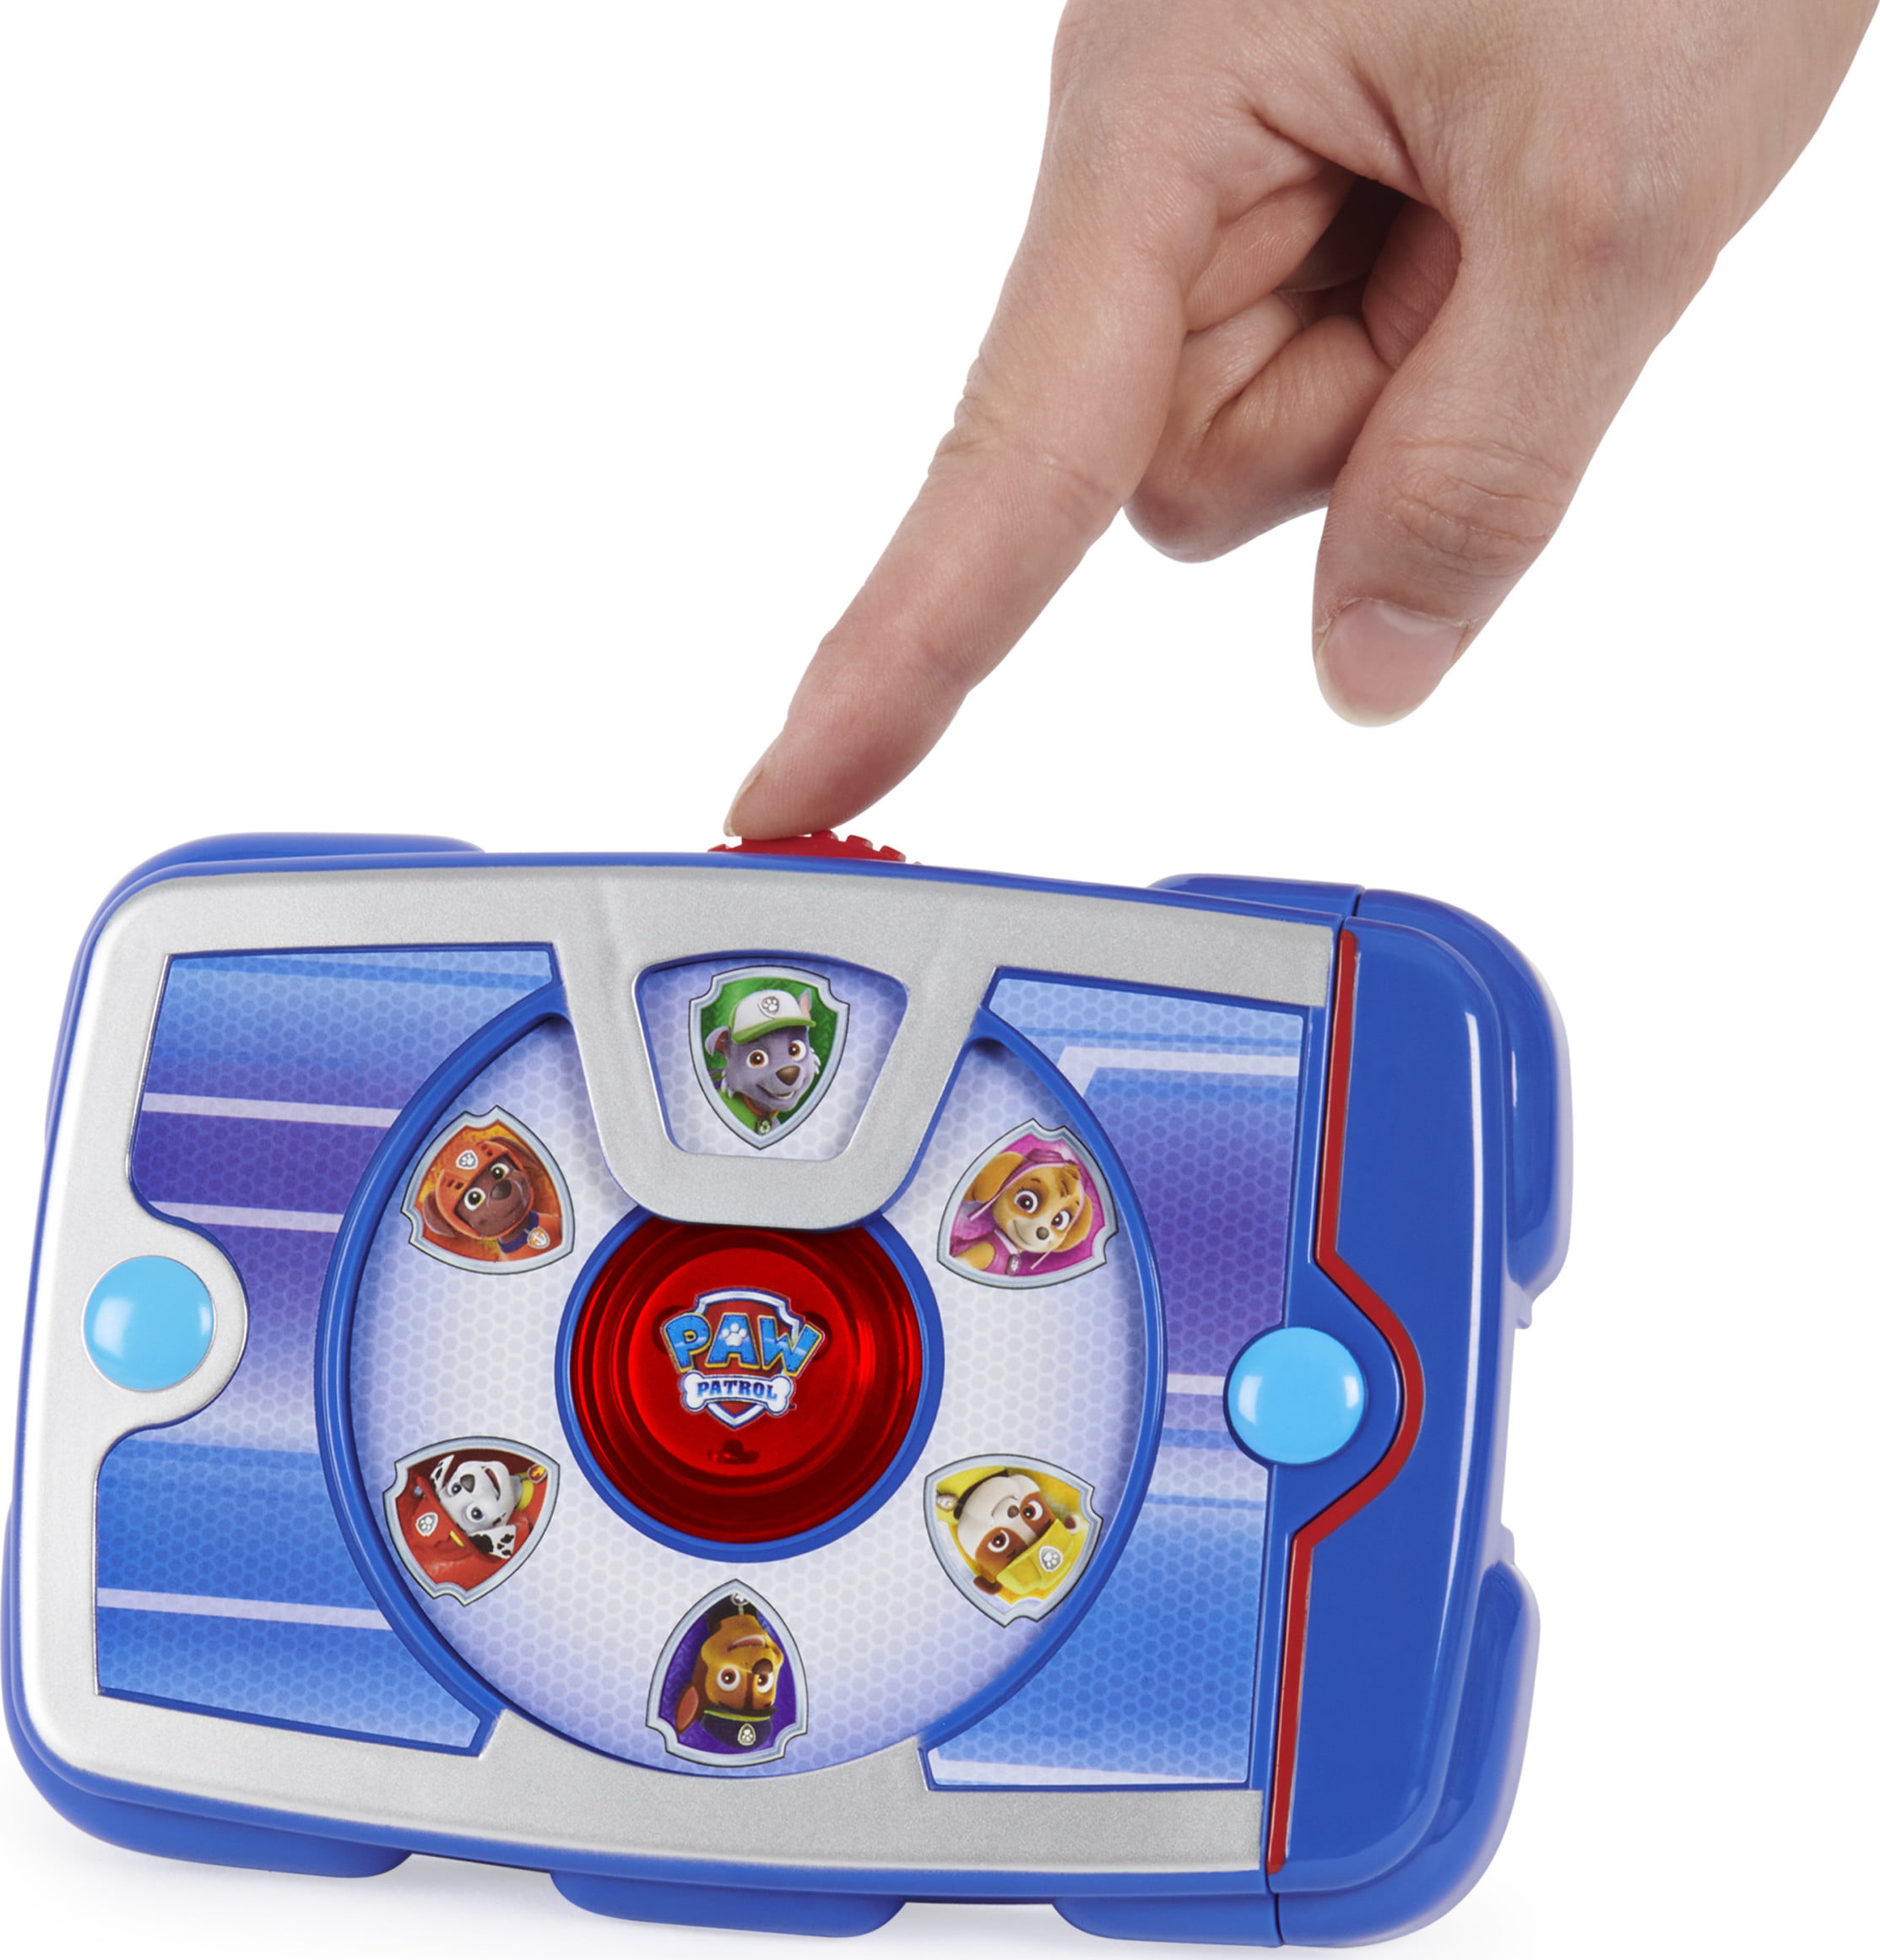 Specialisere Betjening mulig Tremble Paw Patrol, Ryder's Interactive Pup Pad with 18 Sounds and Phrases, Toy for  Kids Aged 3 and up - Walmart.com